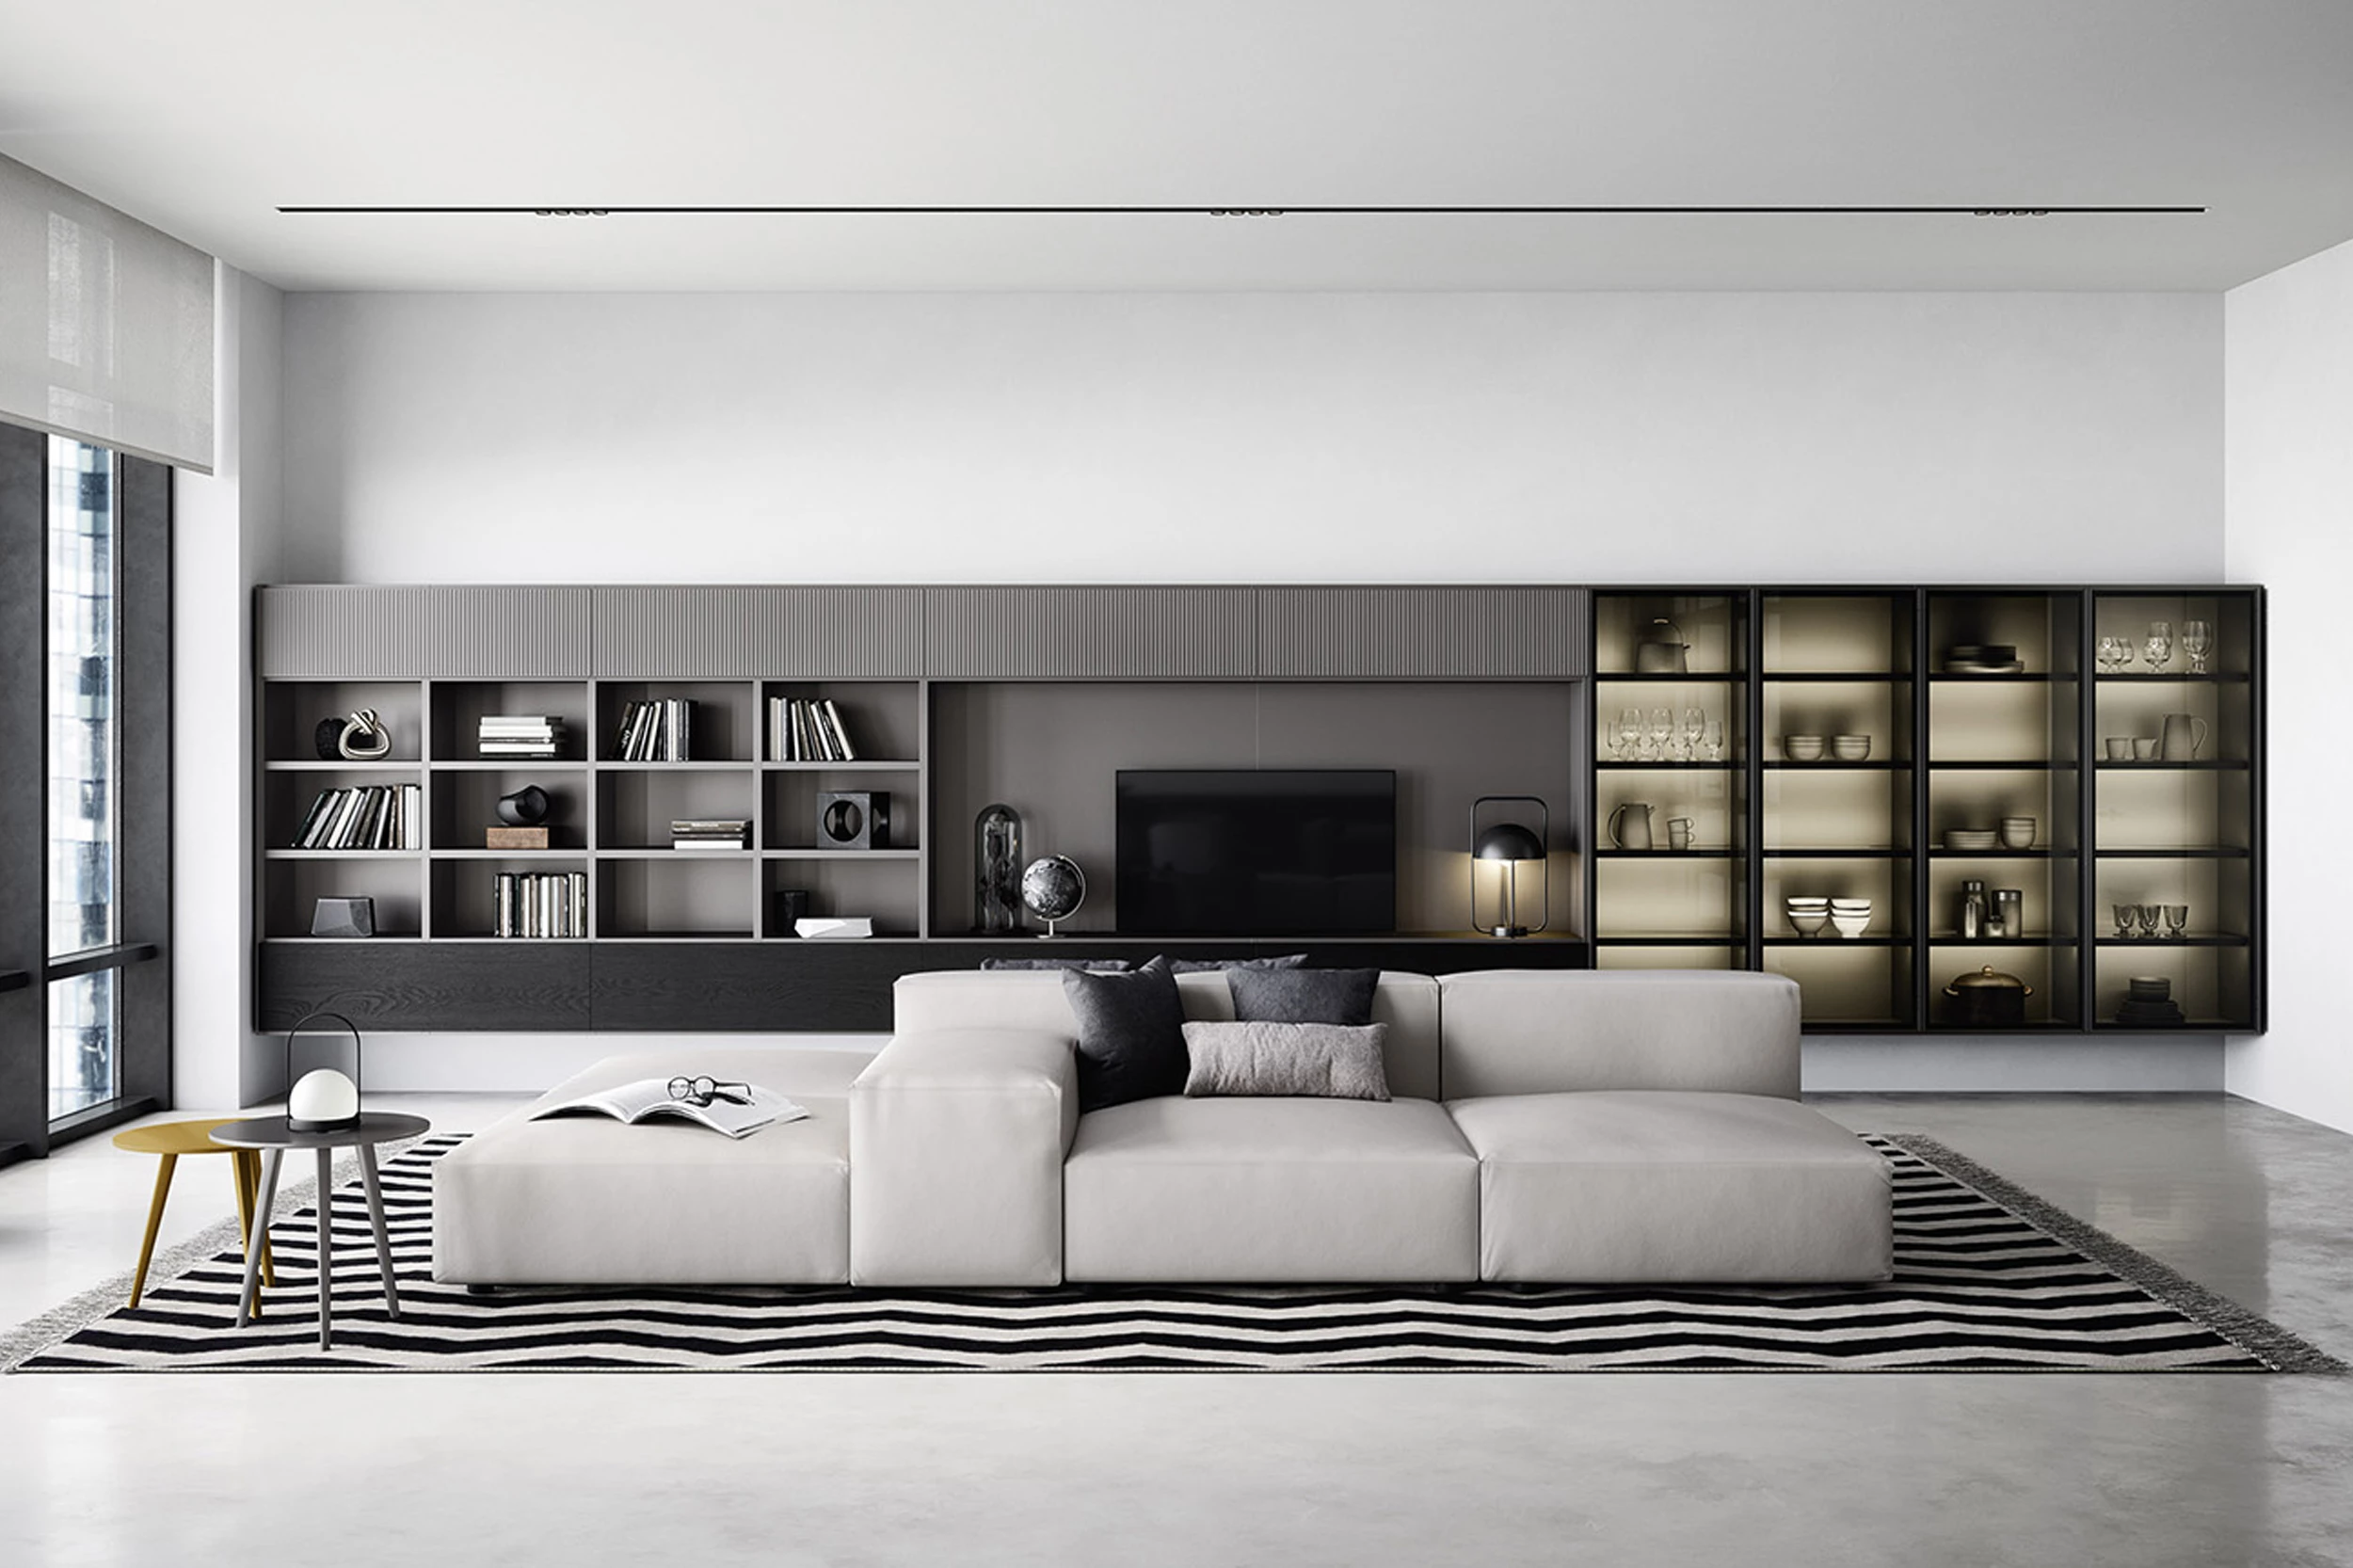 Wall unit system: versatility and style for a modern interior scheme